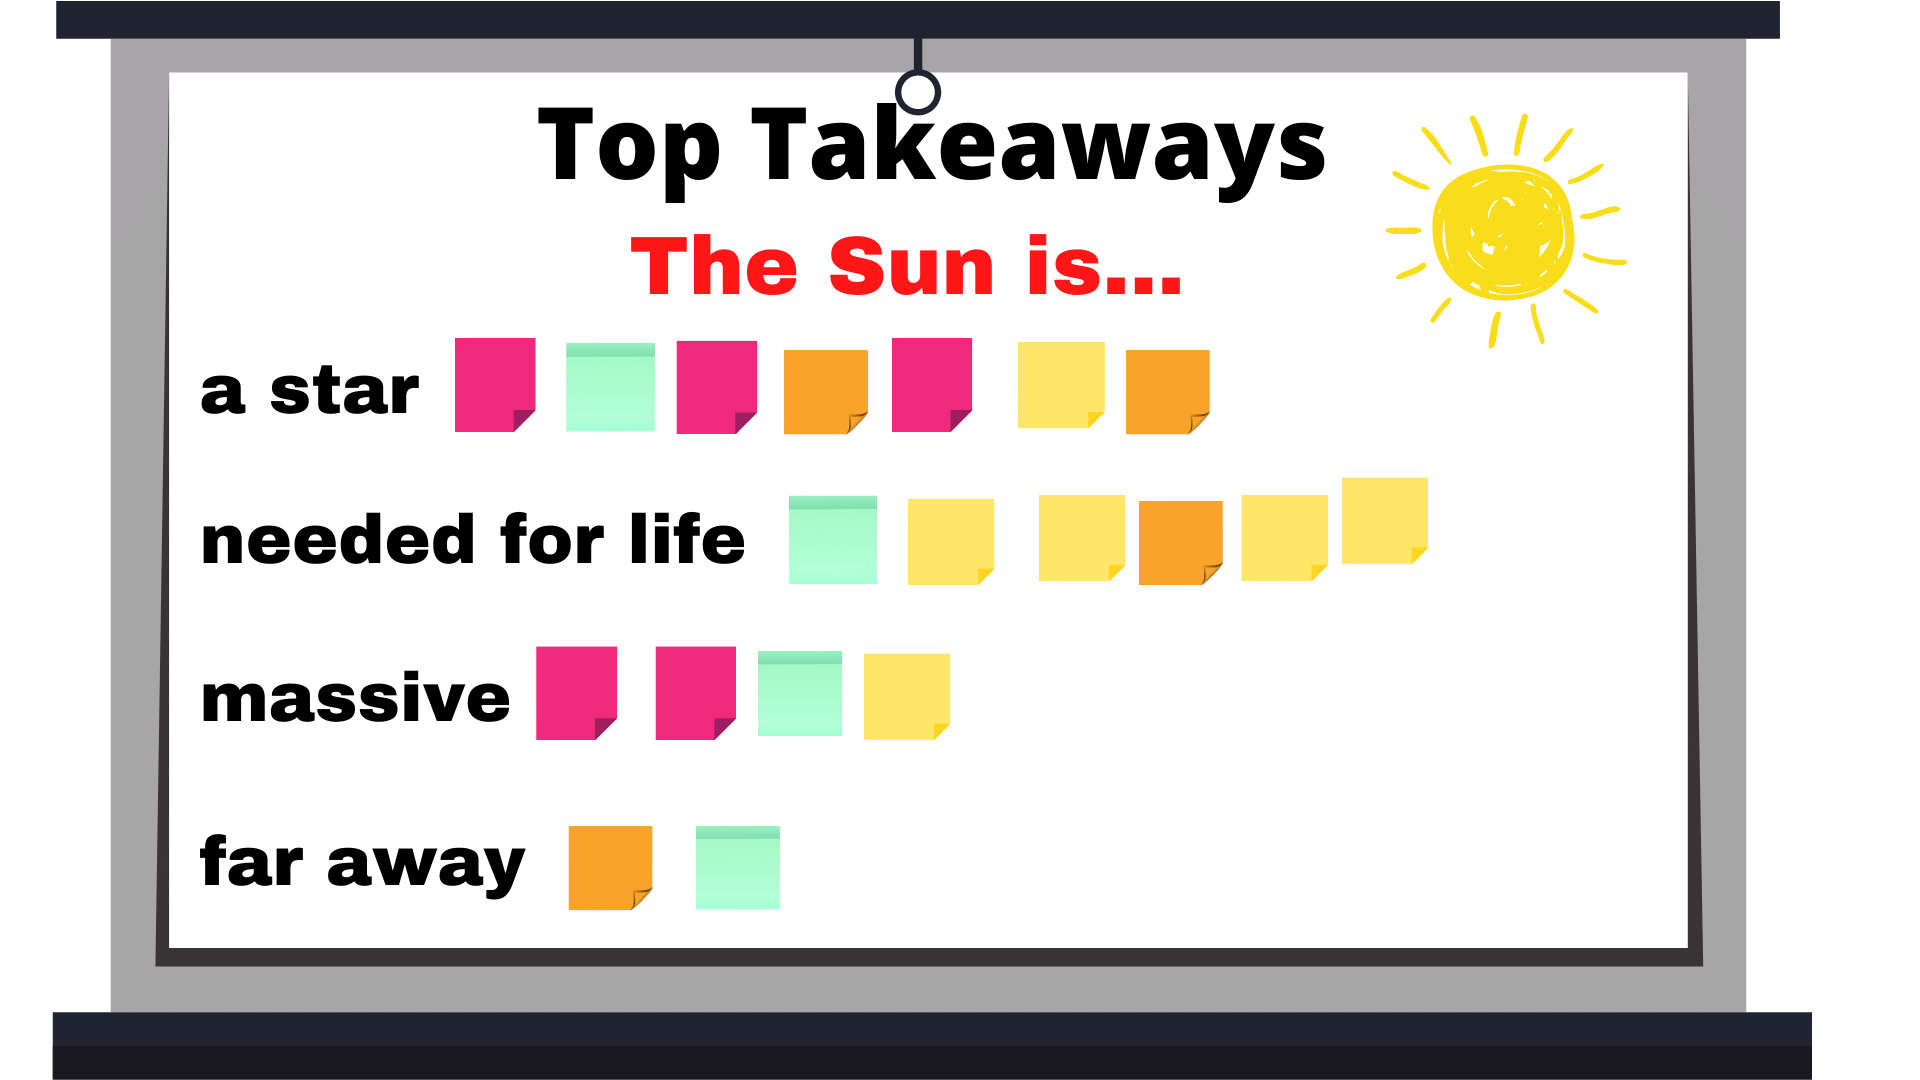 clipart of a white board displays the heading: Top Takeaways; The Sun is...; subheadings include a star, needed for life, massive, and far away; each heading has a collection of colored sticky notes next to it